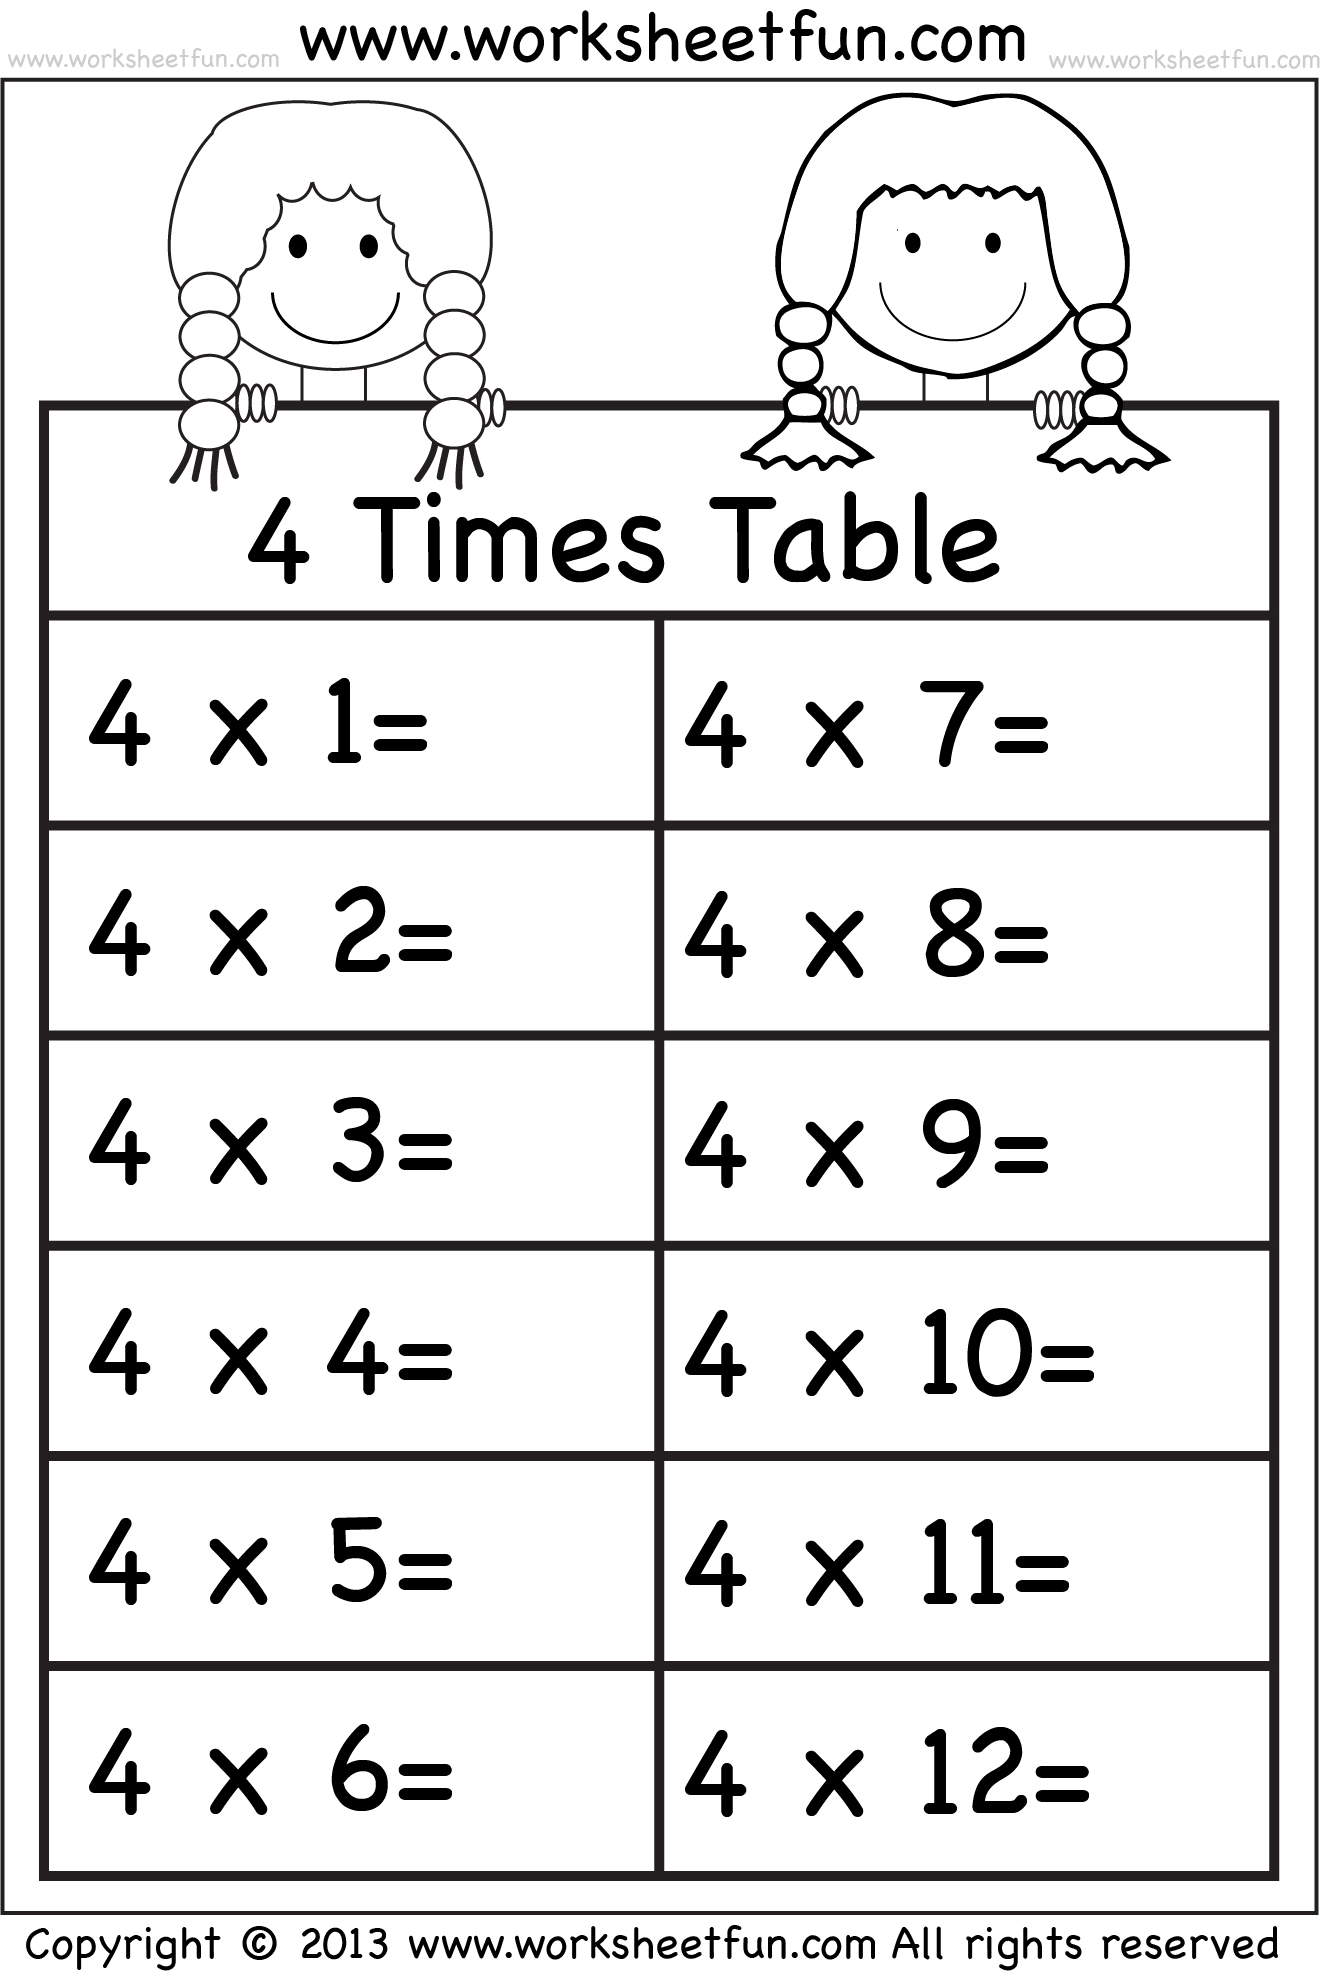 4 Times Table Activity Worksheets